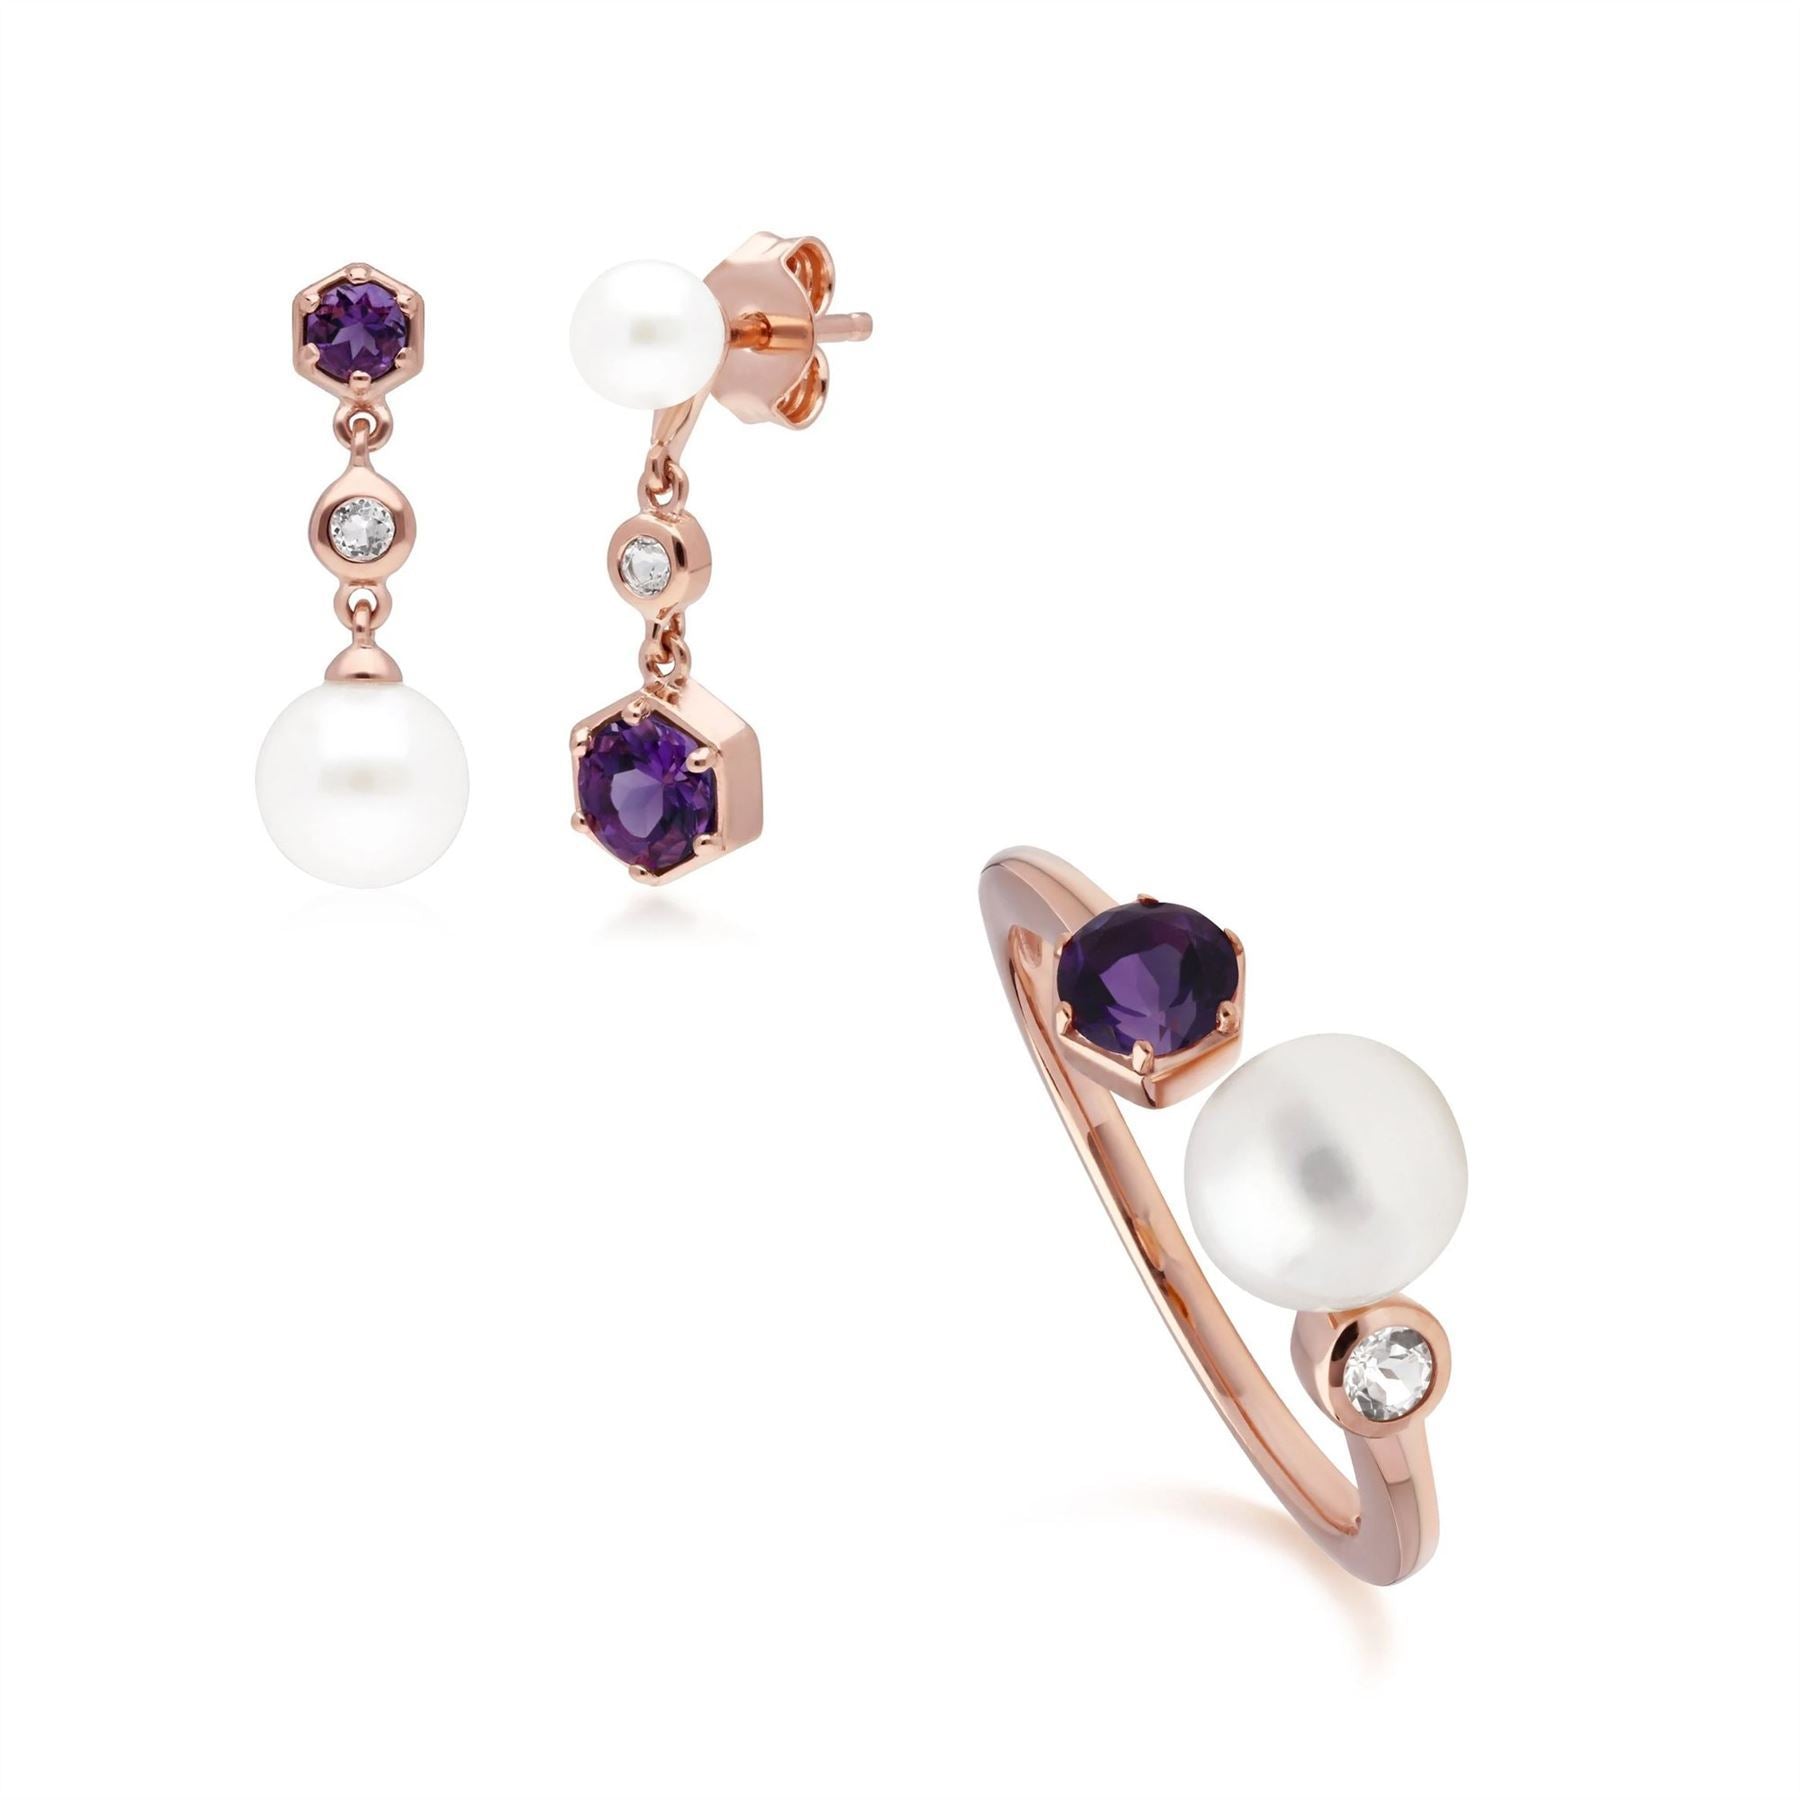 Modern Pearl, Amethyst & Topaz Earring & Ring Set in Rose Gold Plated Sterling Silver